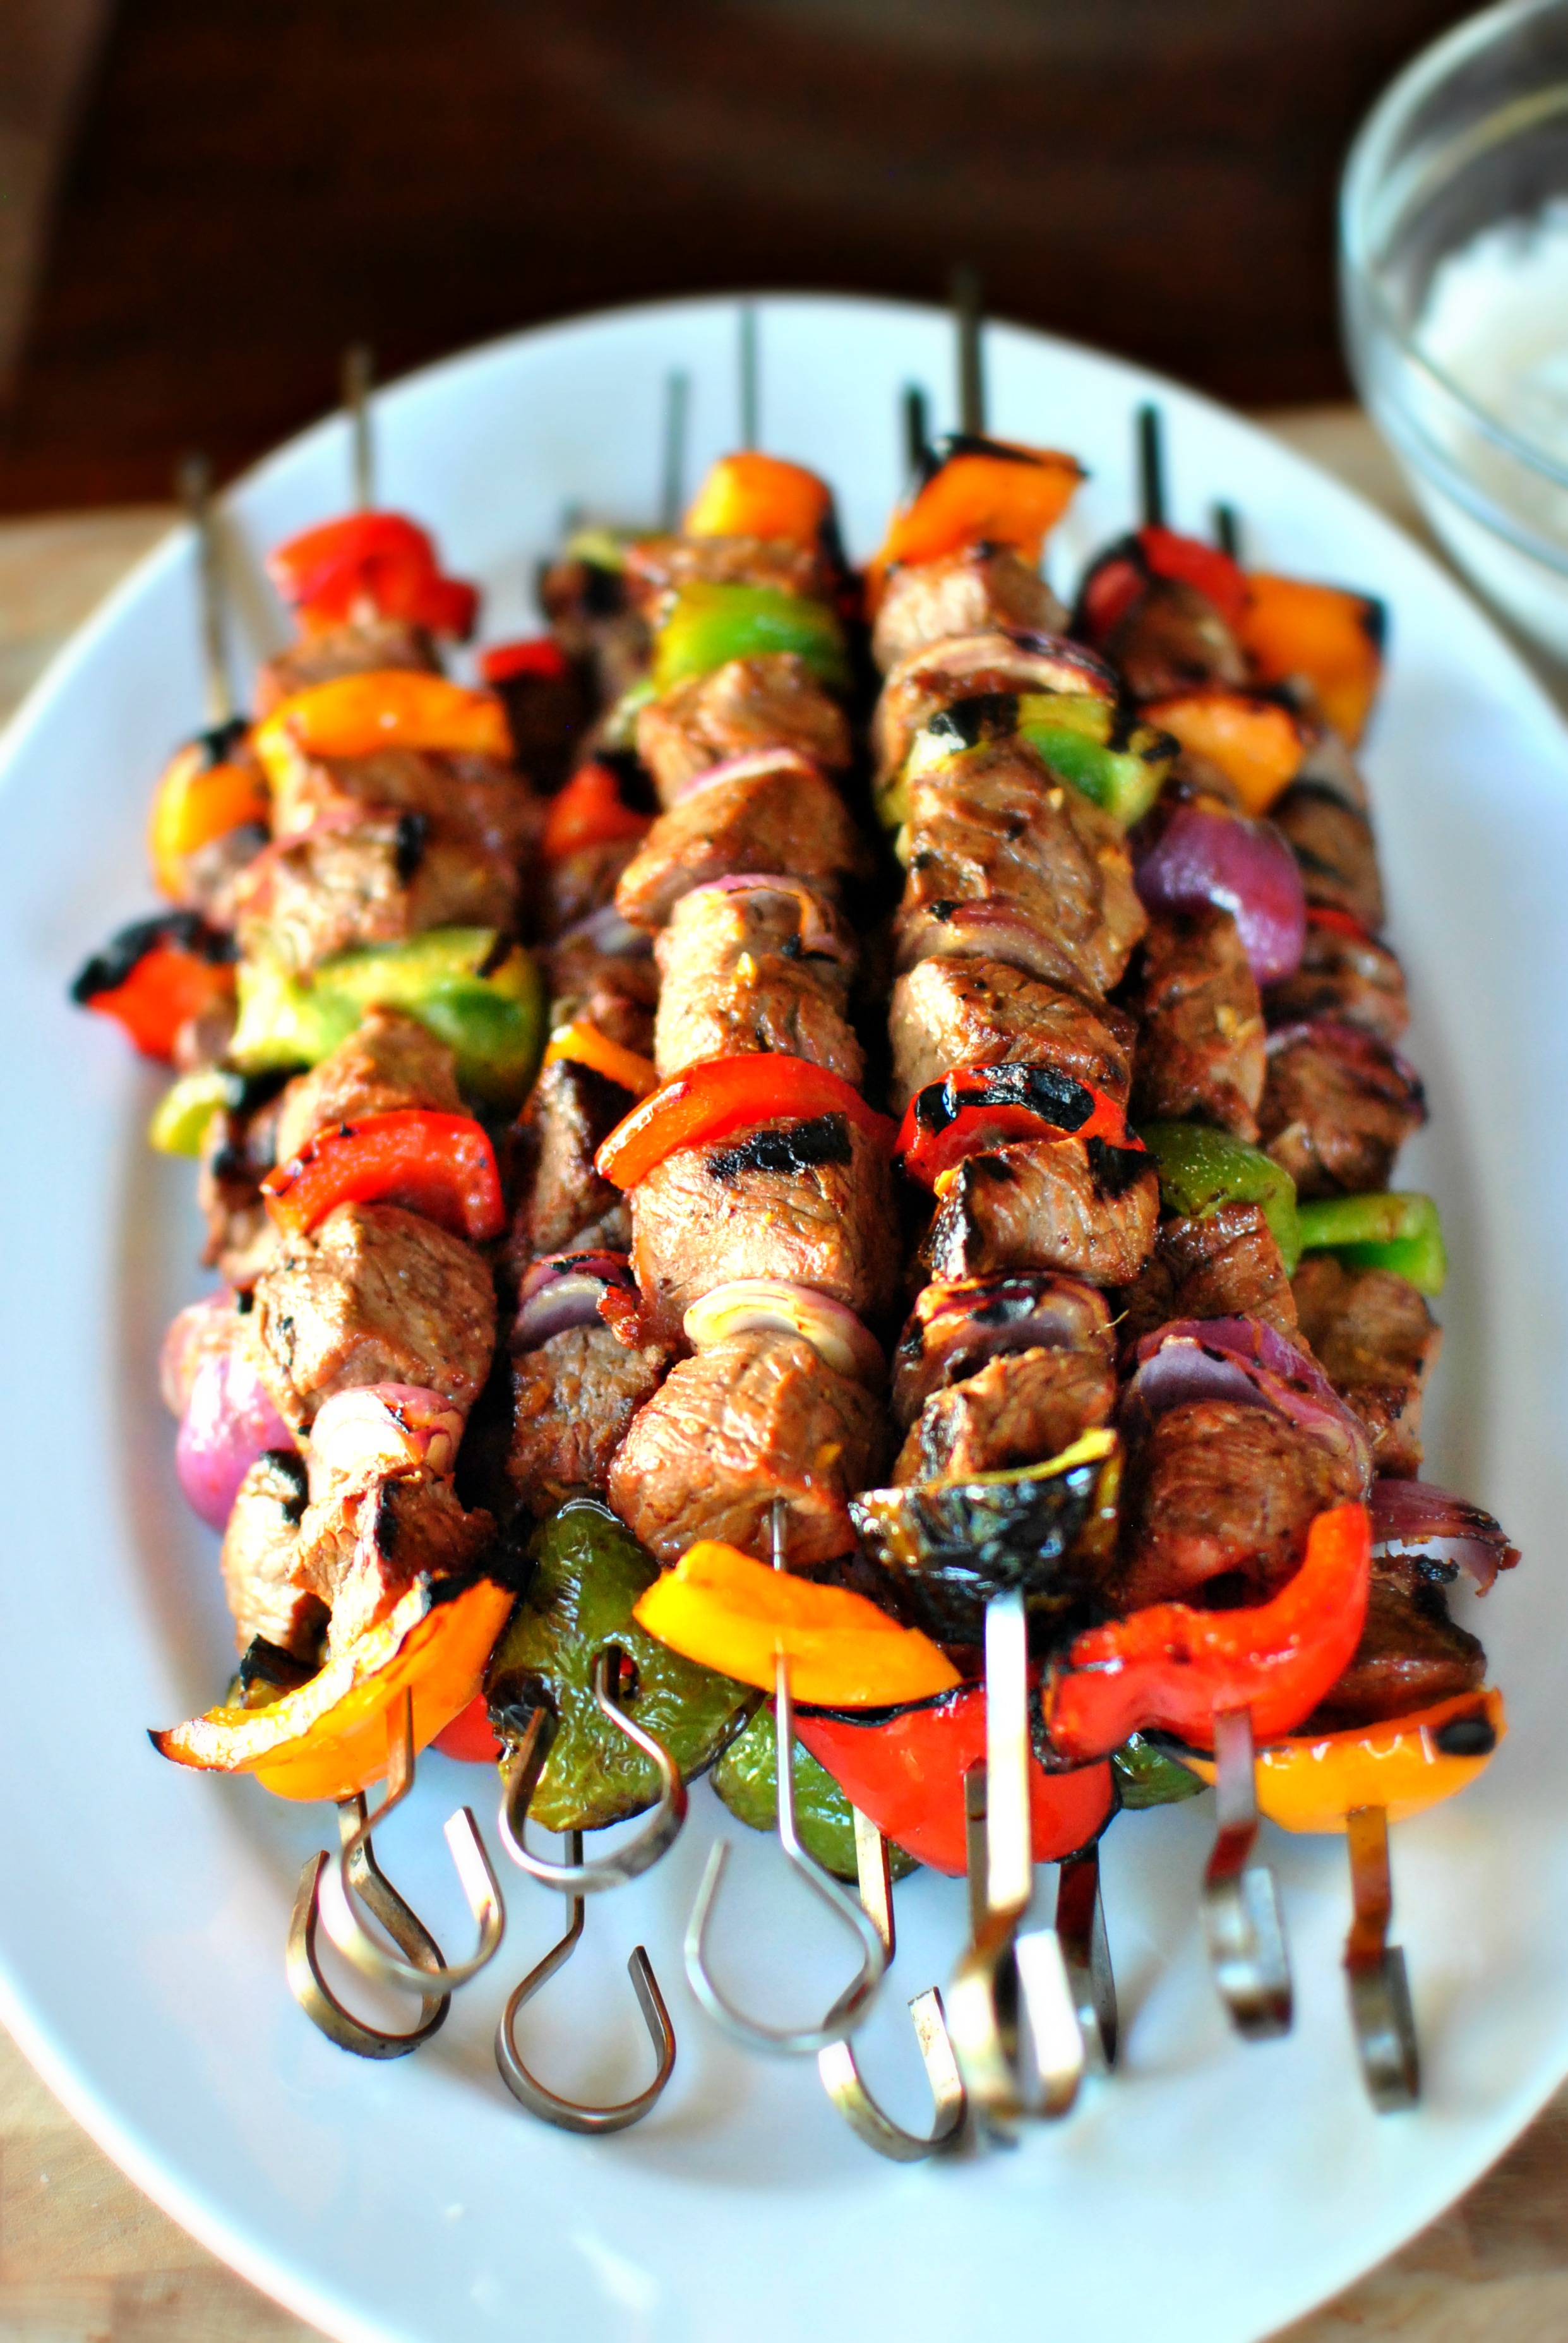 Simply Scratch Grilled Marinated Steak Kebabs - Simply Scratch